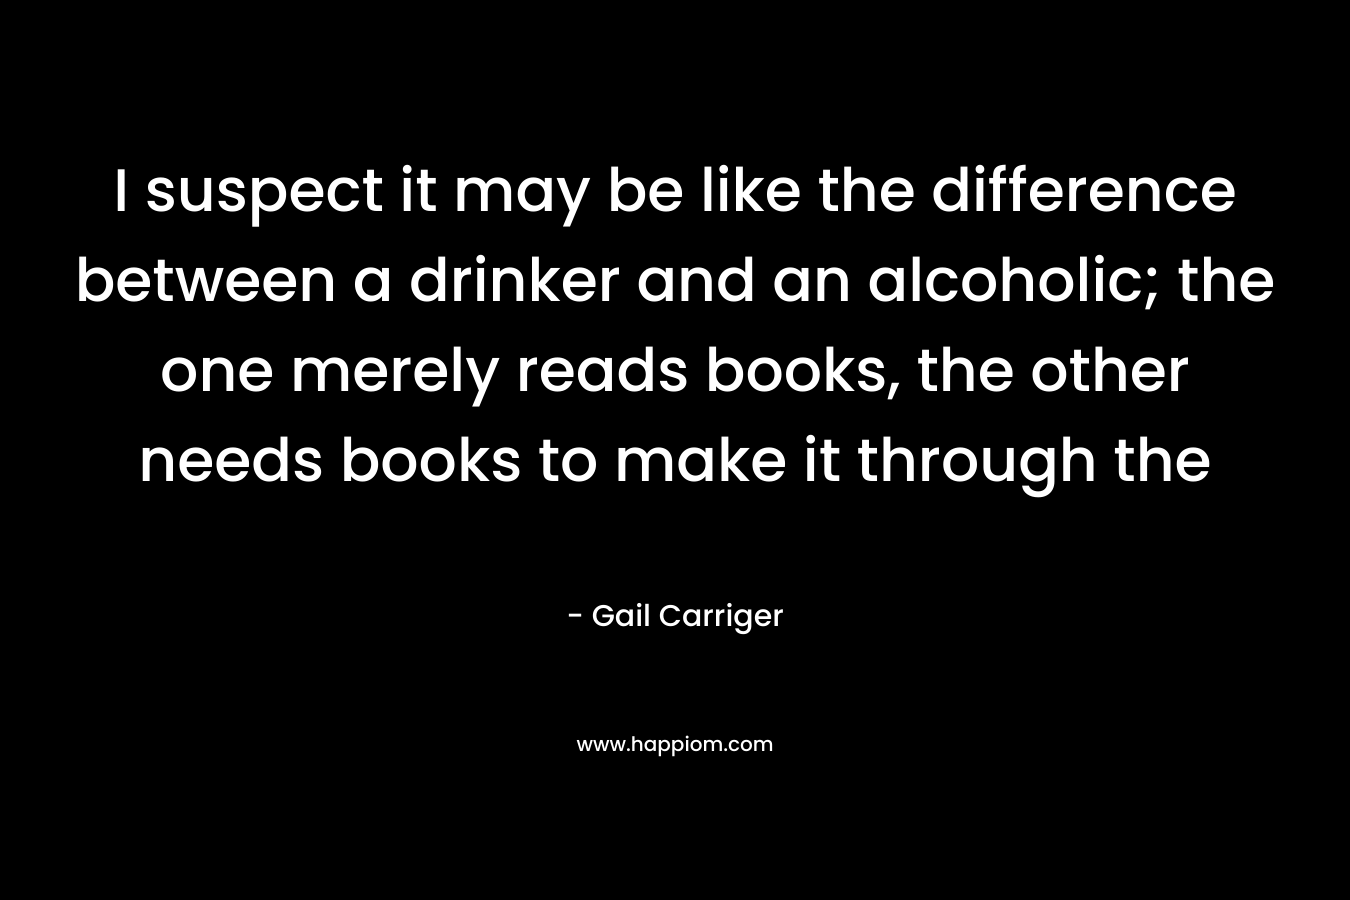 I suspect it may be like the difference between a drinker and an alcoholic; the one merely reads books, the other needs books to make it through the